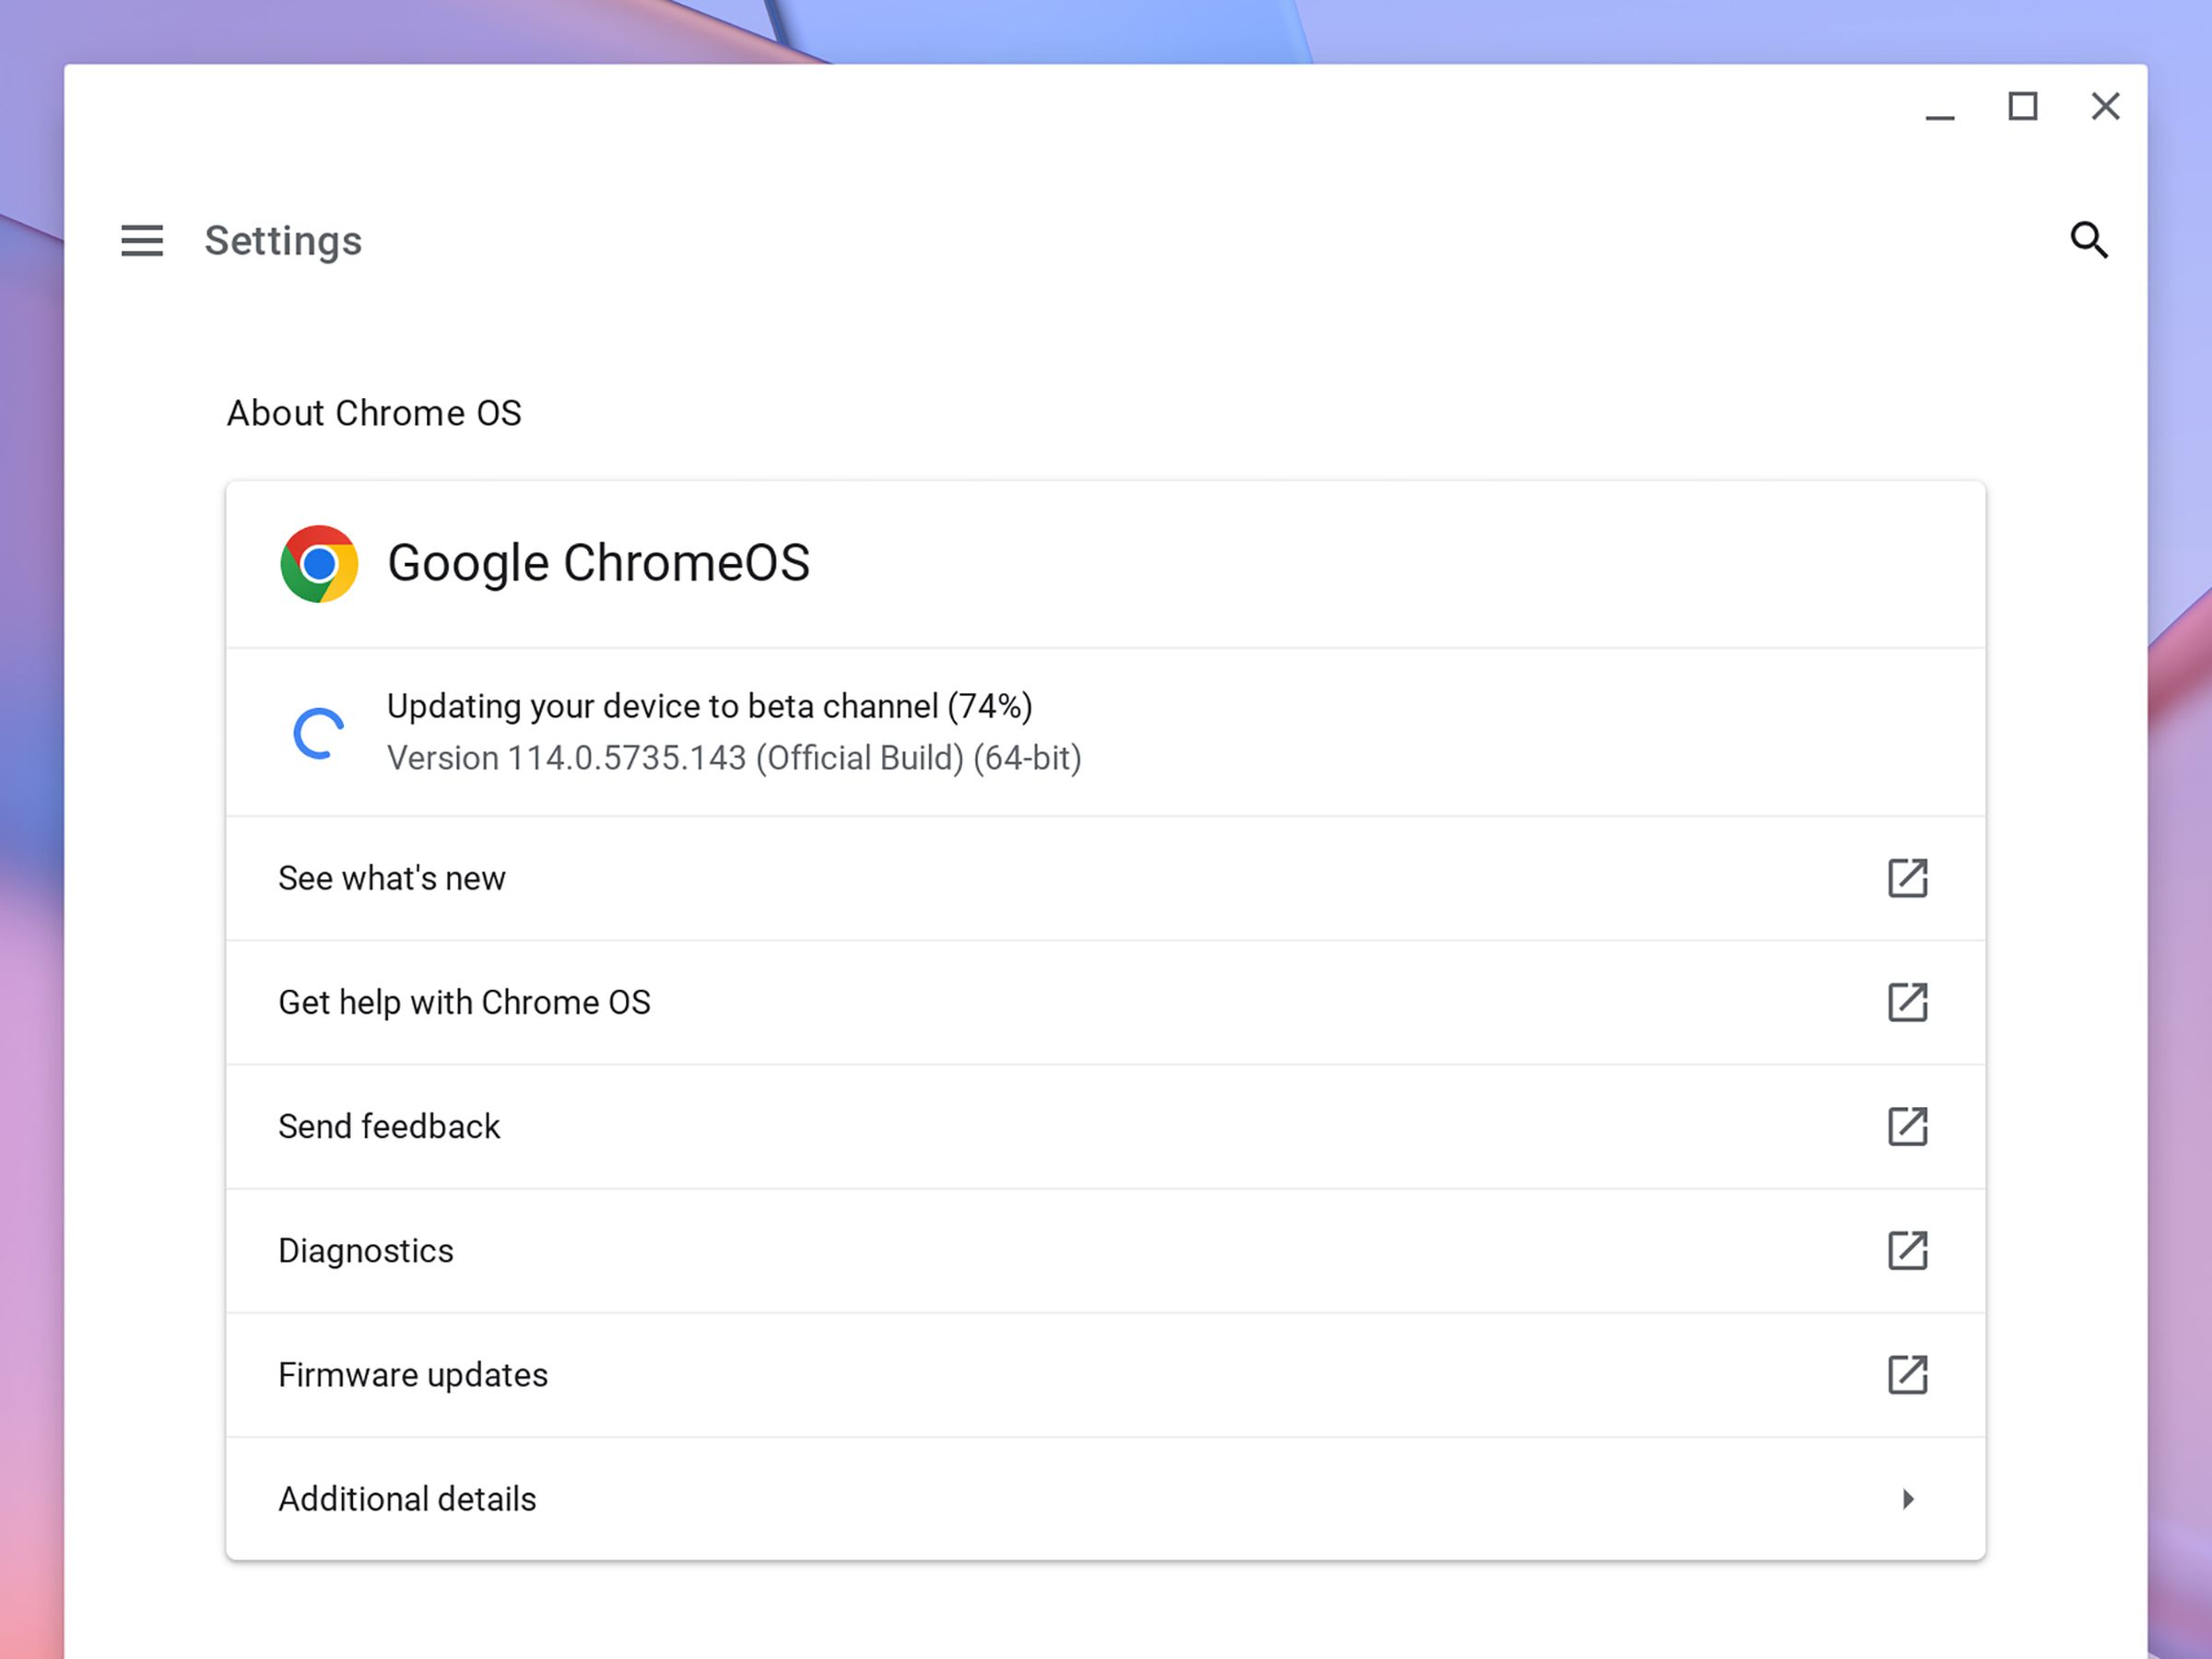 Settings page with Google ChromeOS beneath that, an updating statement, and a series of options such as See what’s new and Get help with Chrome OS.